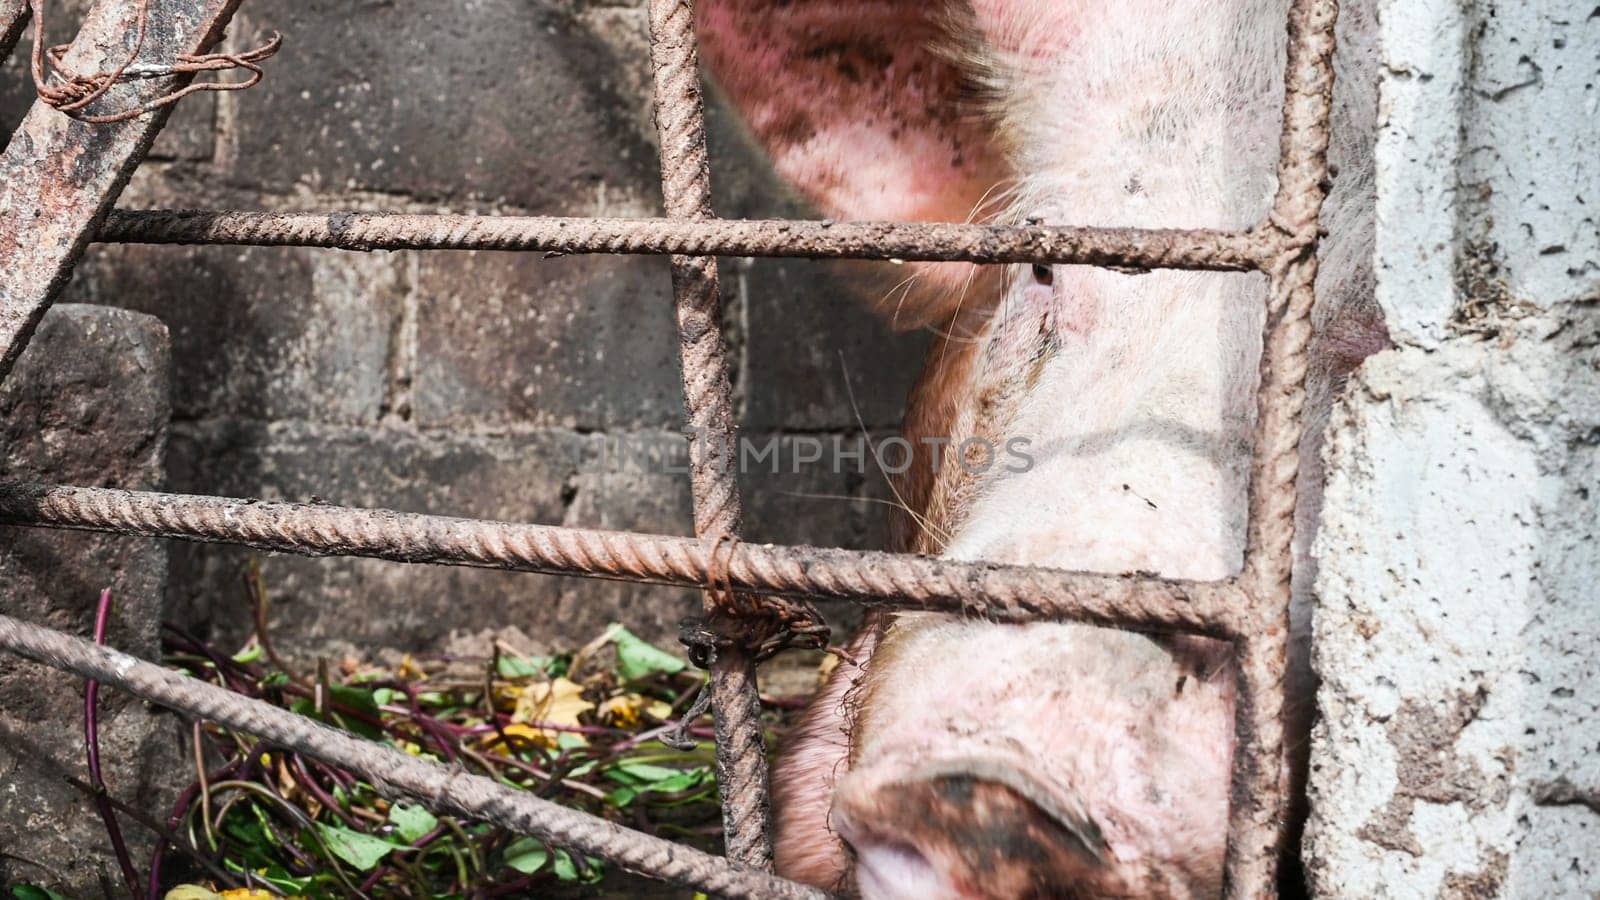 Breeding pig, fat and big, lying on the ground, in the farm pen. by Peruphotoart